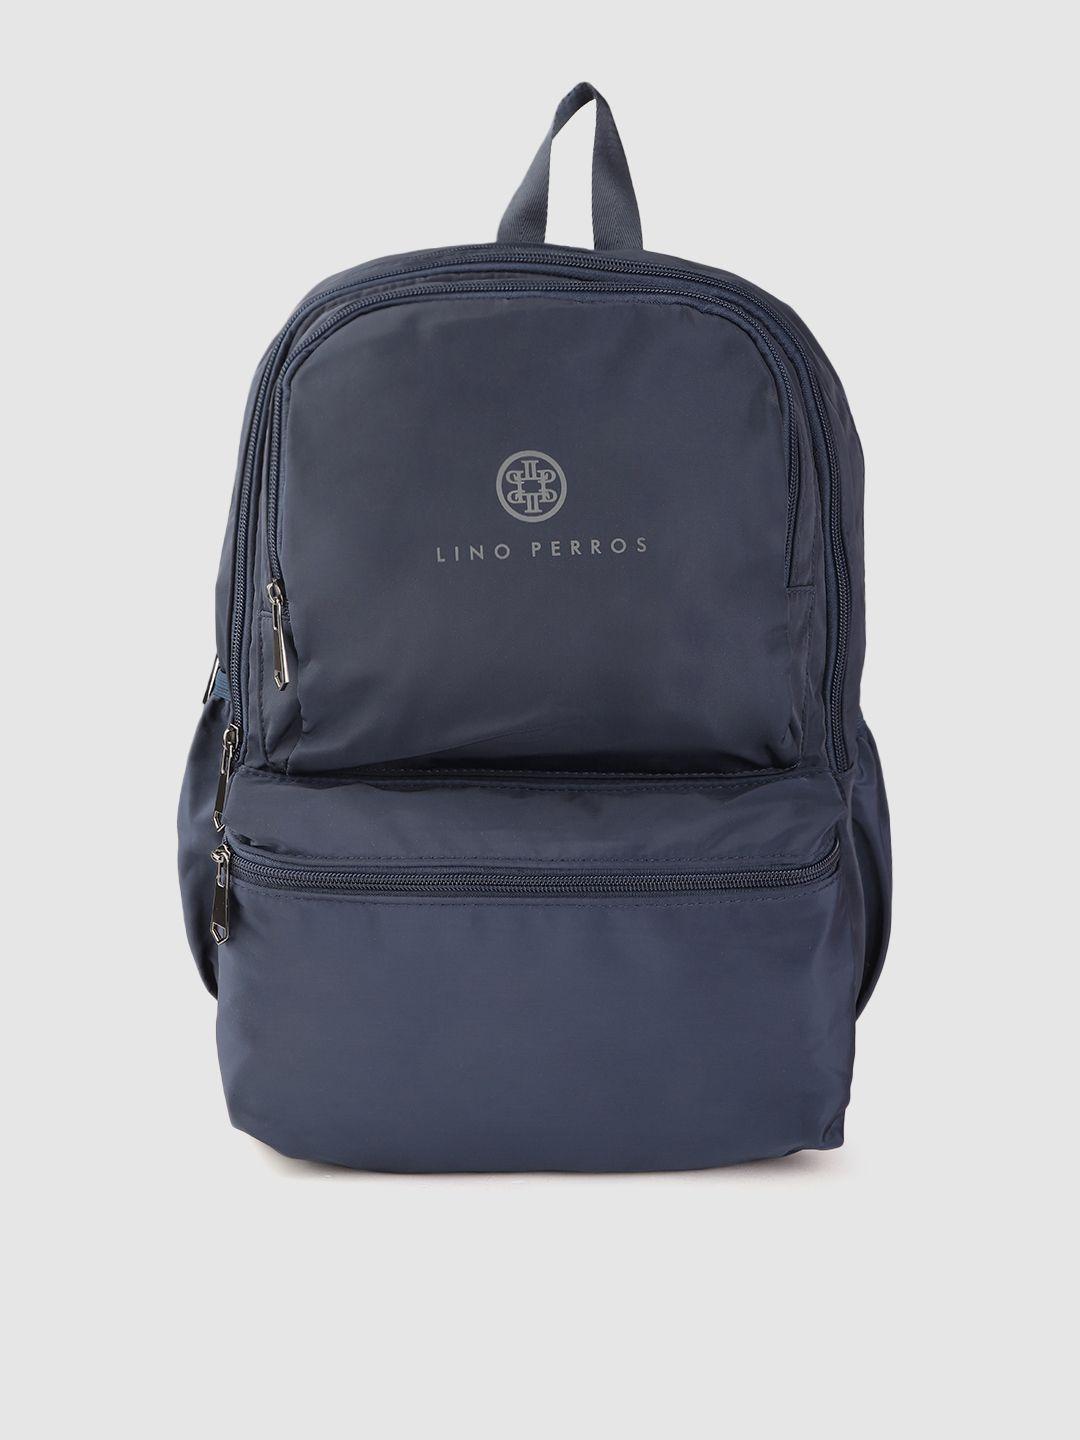 lino perros women navy blue 14 inch laptop backpack